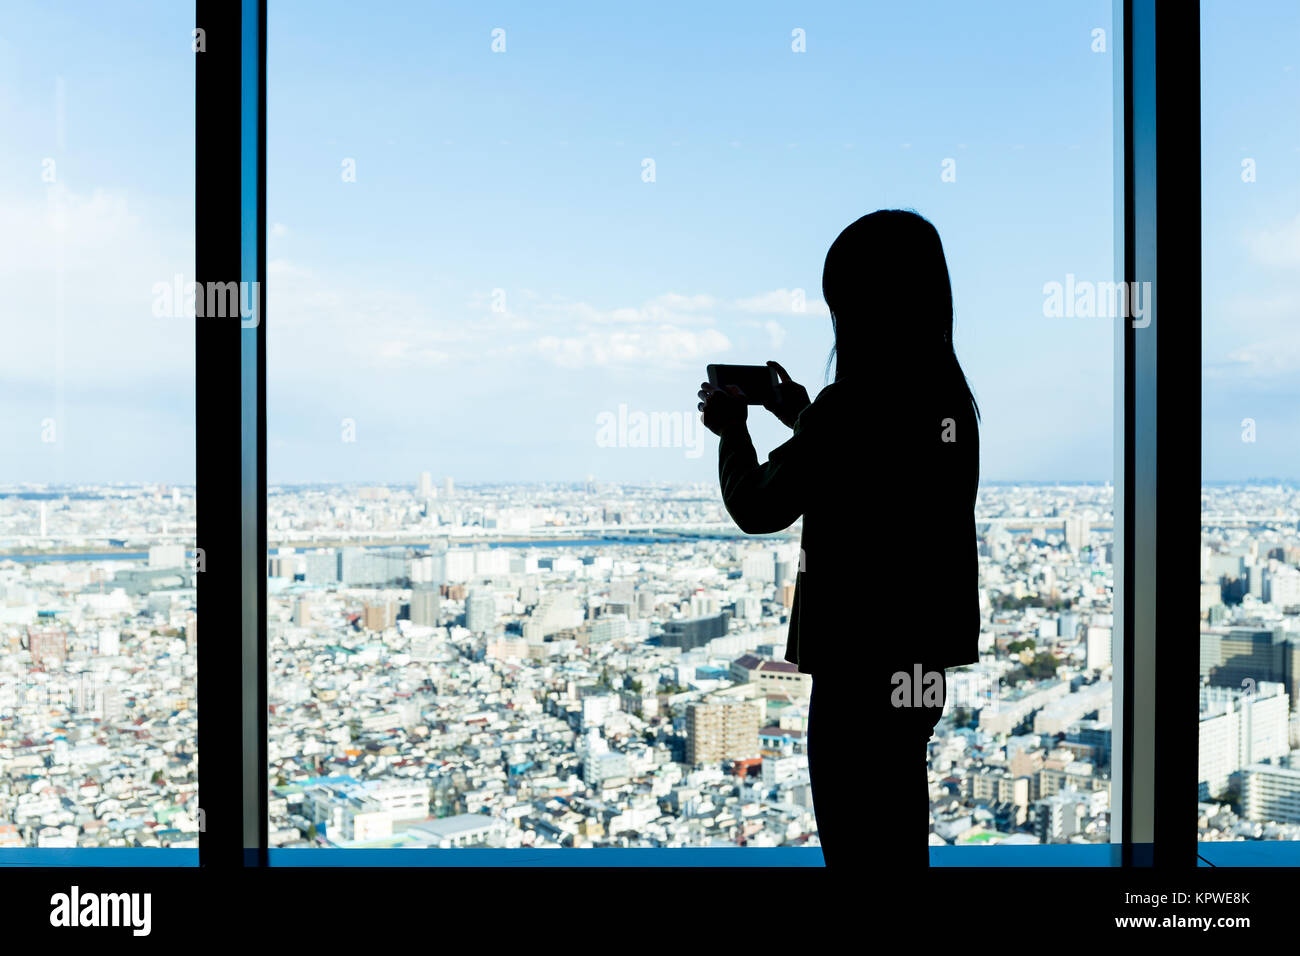 Silhouette of woman shooting photo Banque D'Images